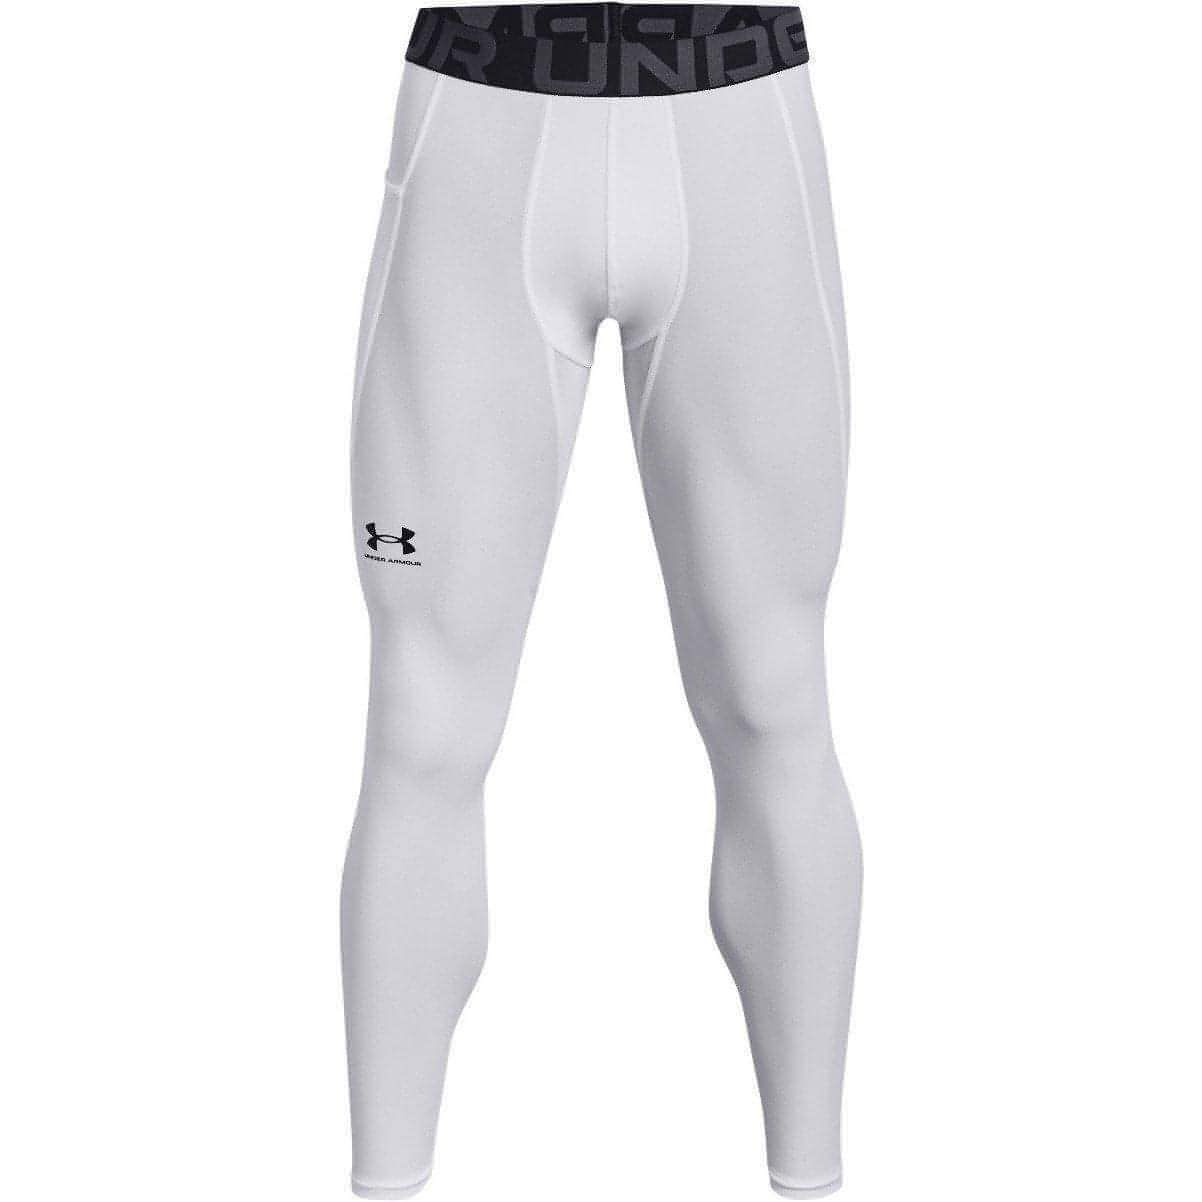 Under Armour HeatGear Mens Long Compression Tights - White - Start Fitness